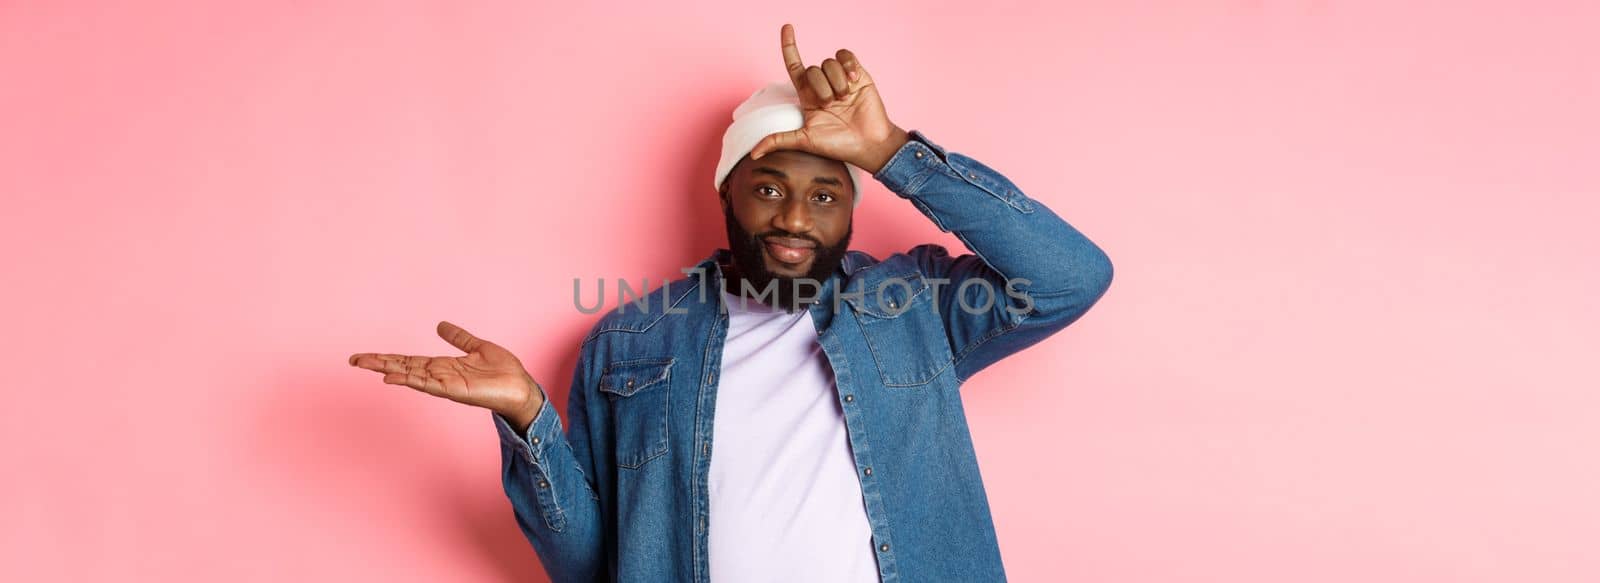 Sad african-american man showing loser sign on forehead and staring at camera, standing over pink background.